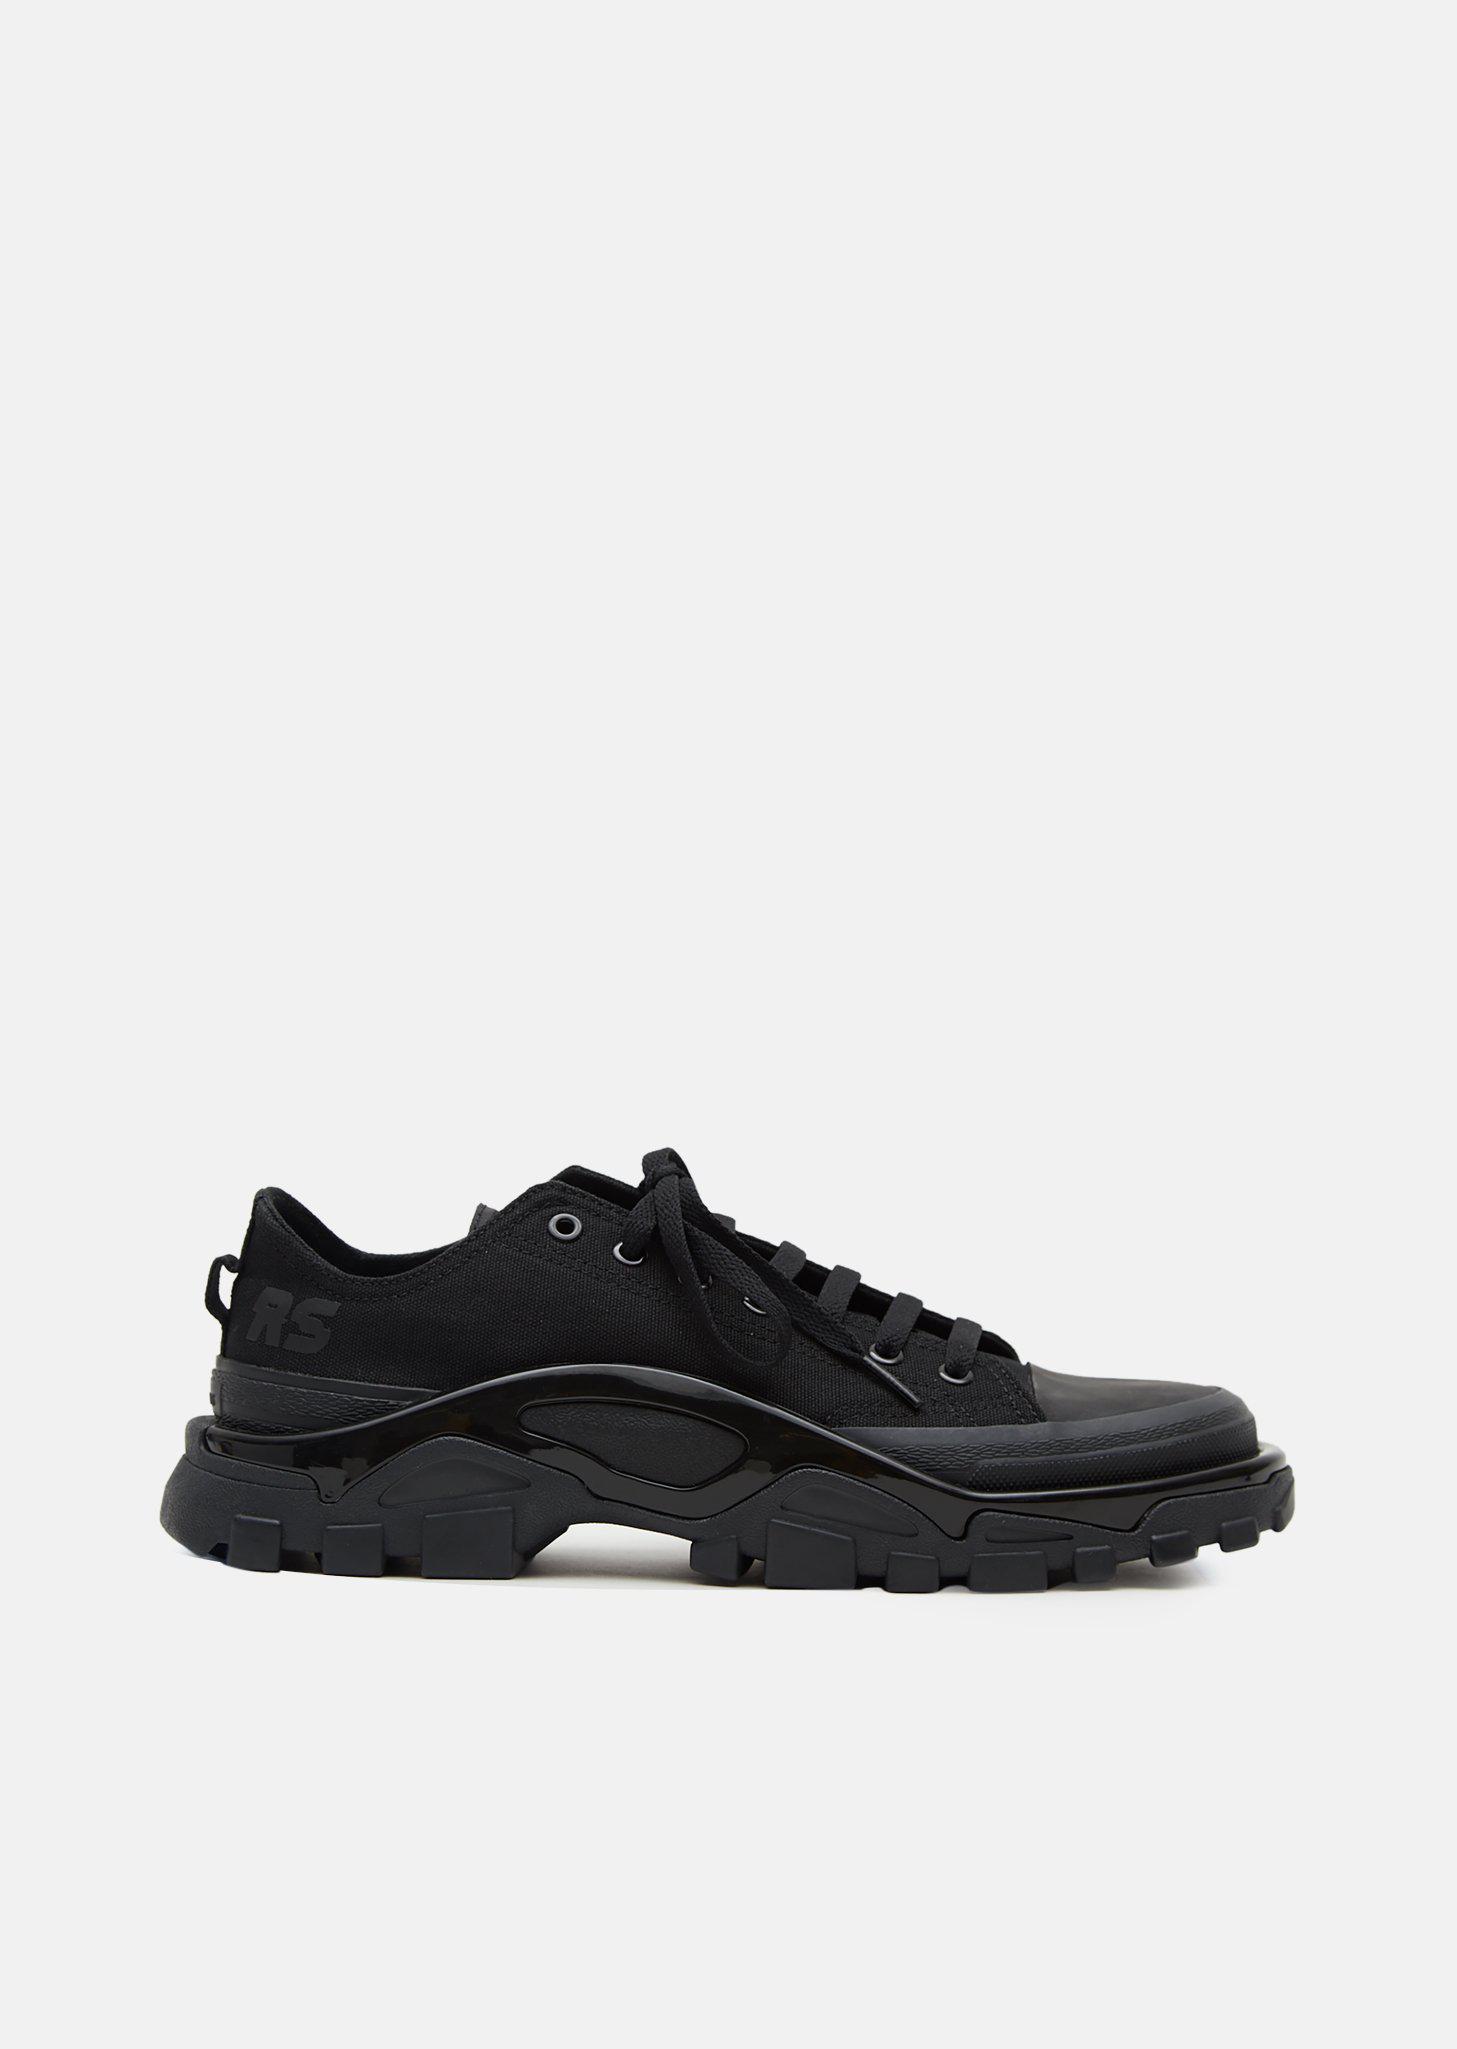 adidas By Raf Simons Canvas Rs Detroit Runner Sneakers in Black - Lyst